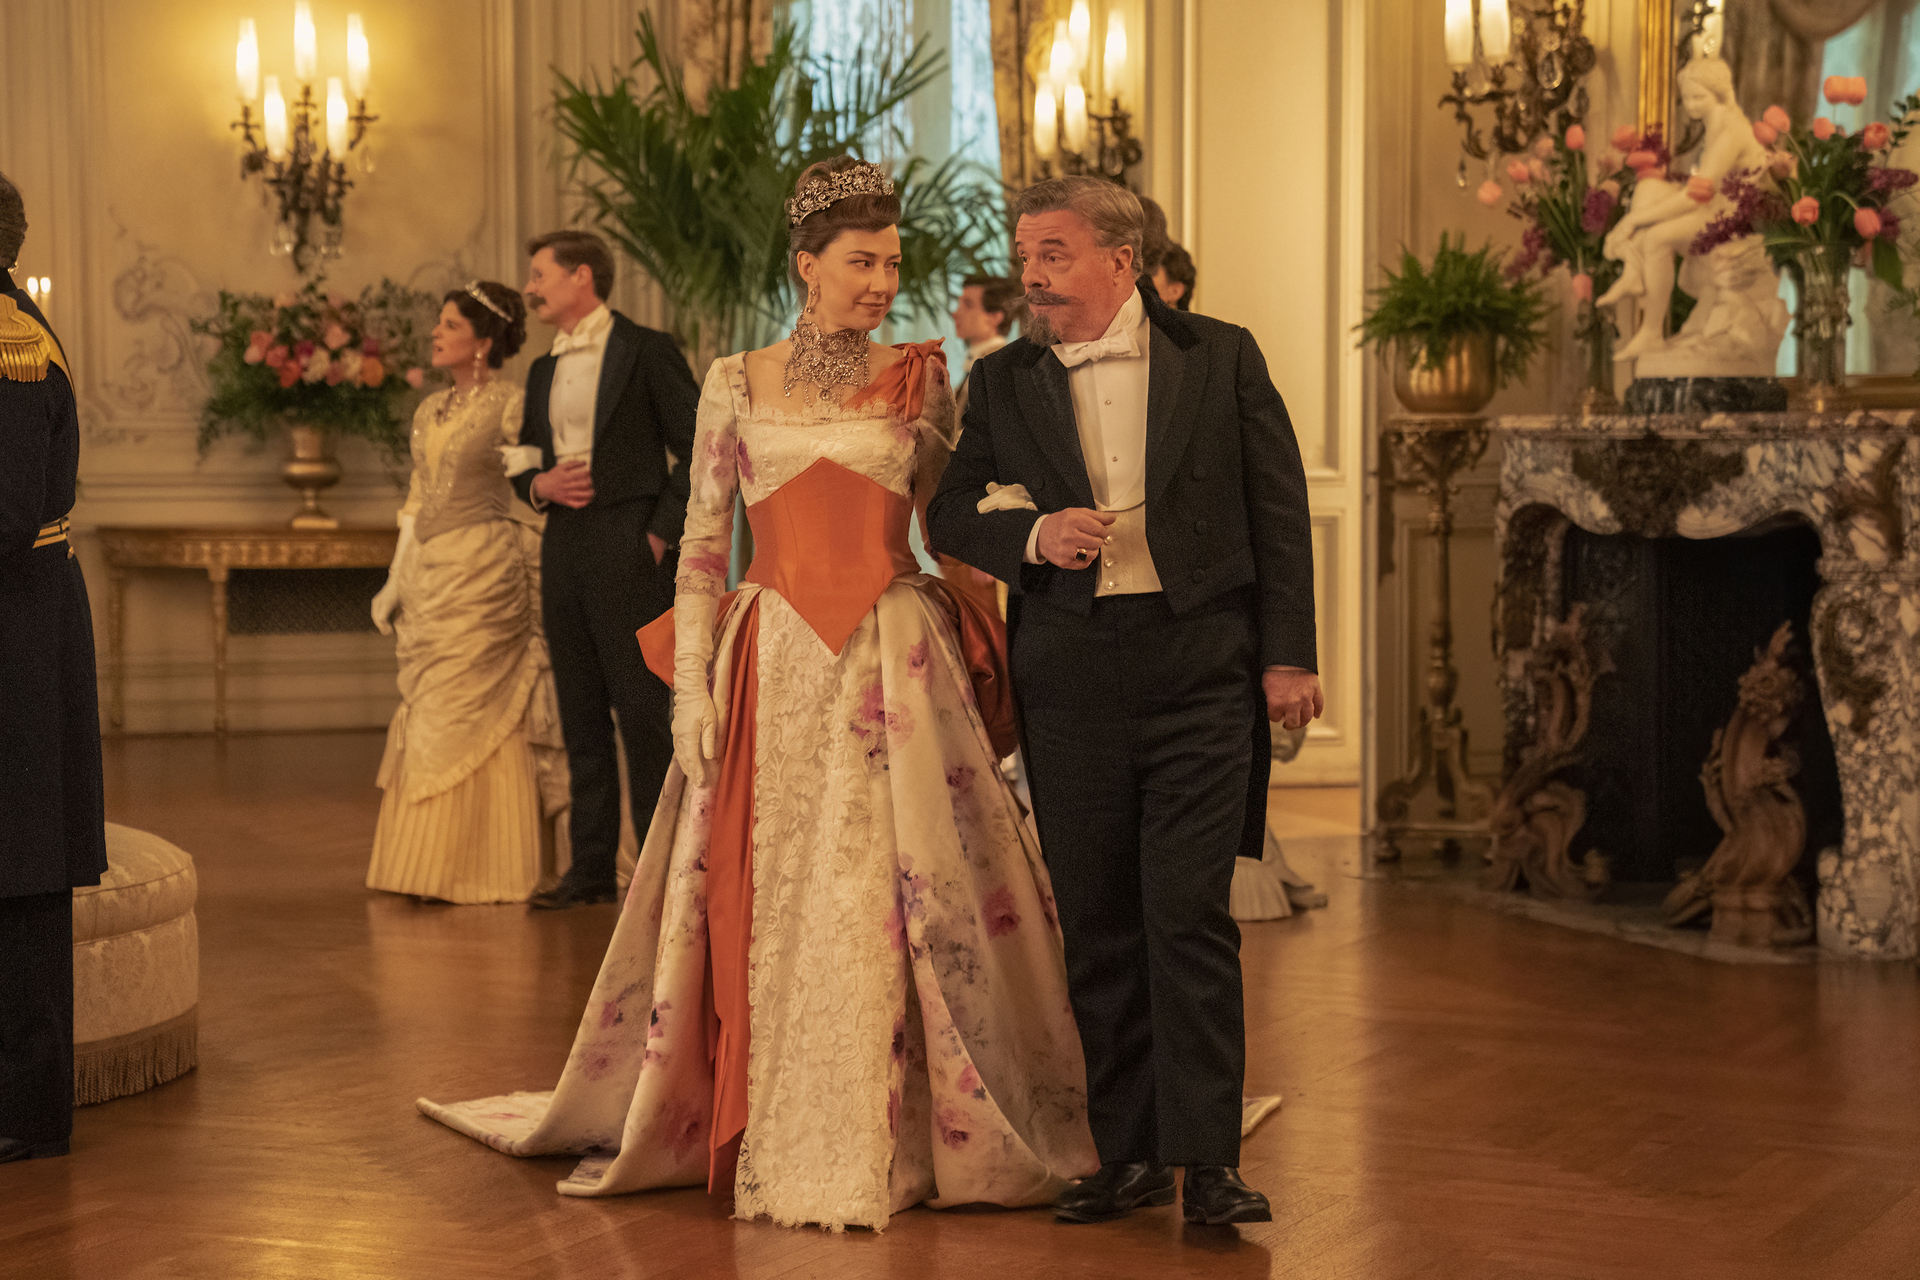 Carrie Coon as Bertha Russell and Nathan Lane as Ward McAllister victory lapping around the ballroom in 'The Gilded Age' Season 2